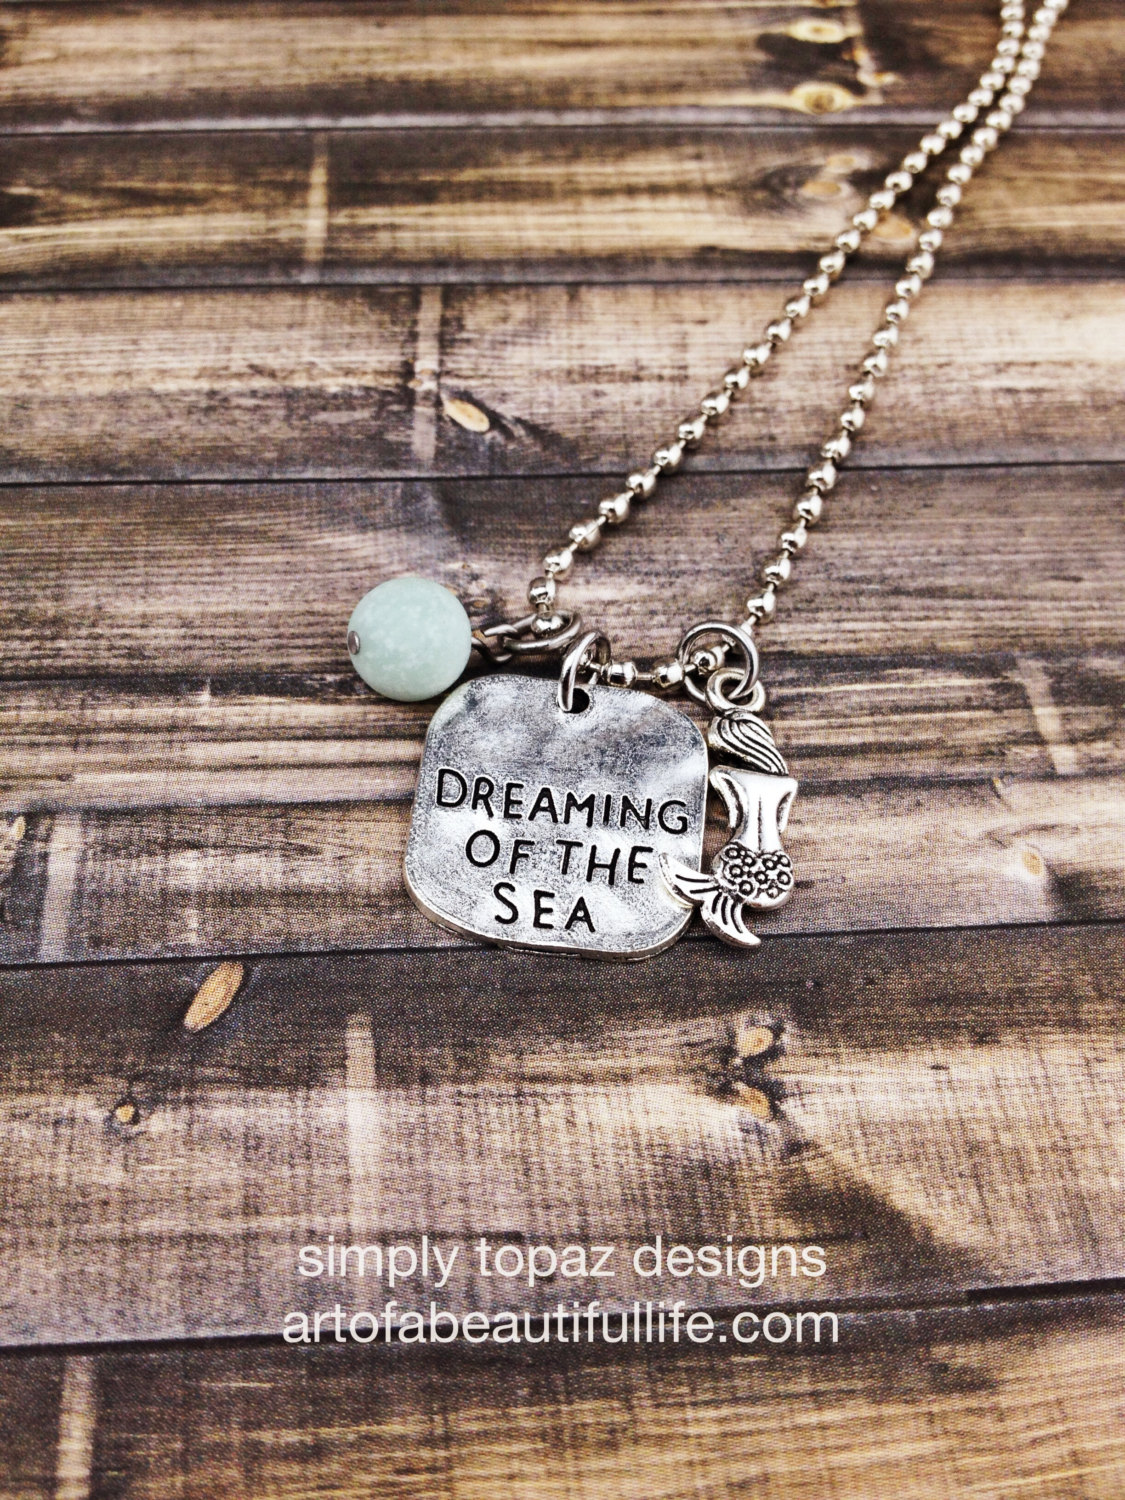 Dreaming of the Sea Mermaid Necklace with Amazonite